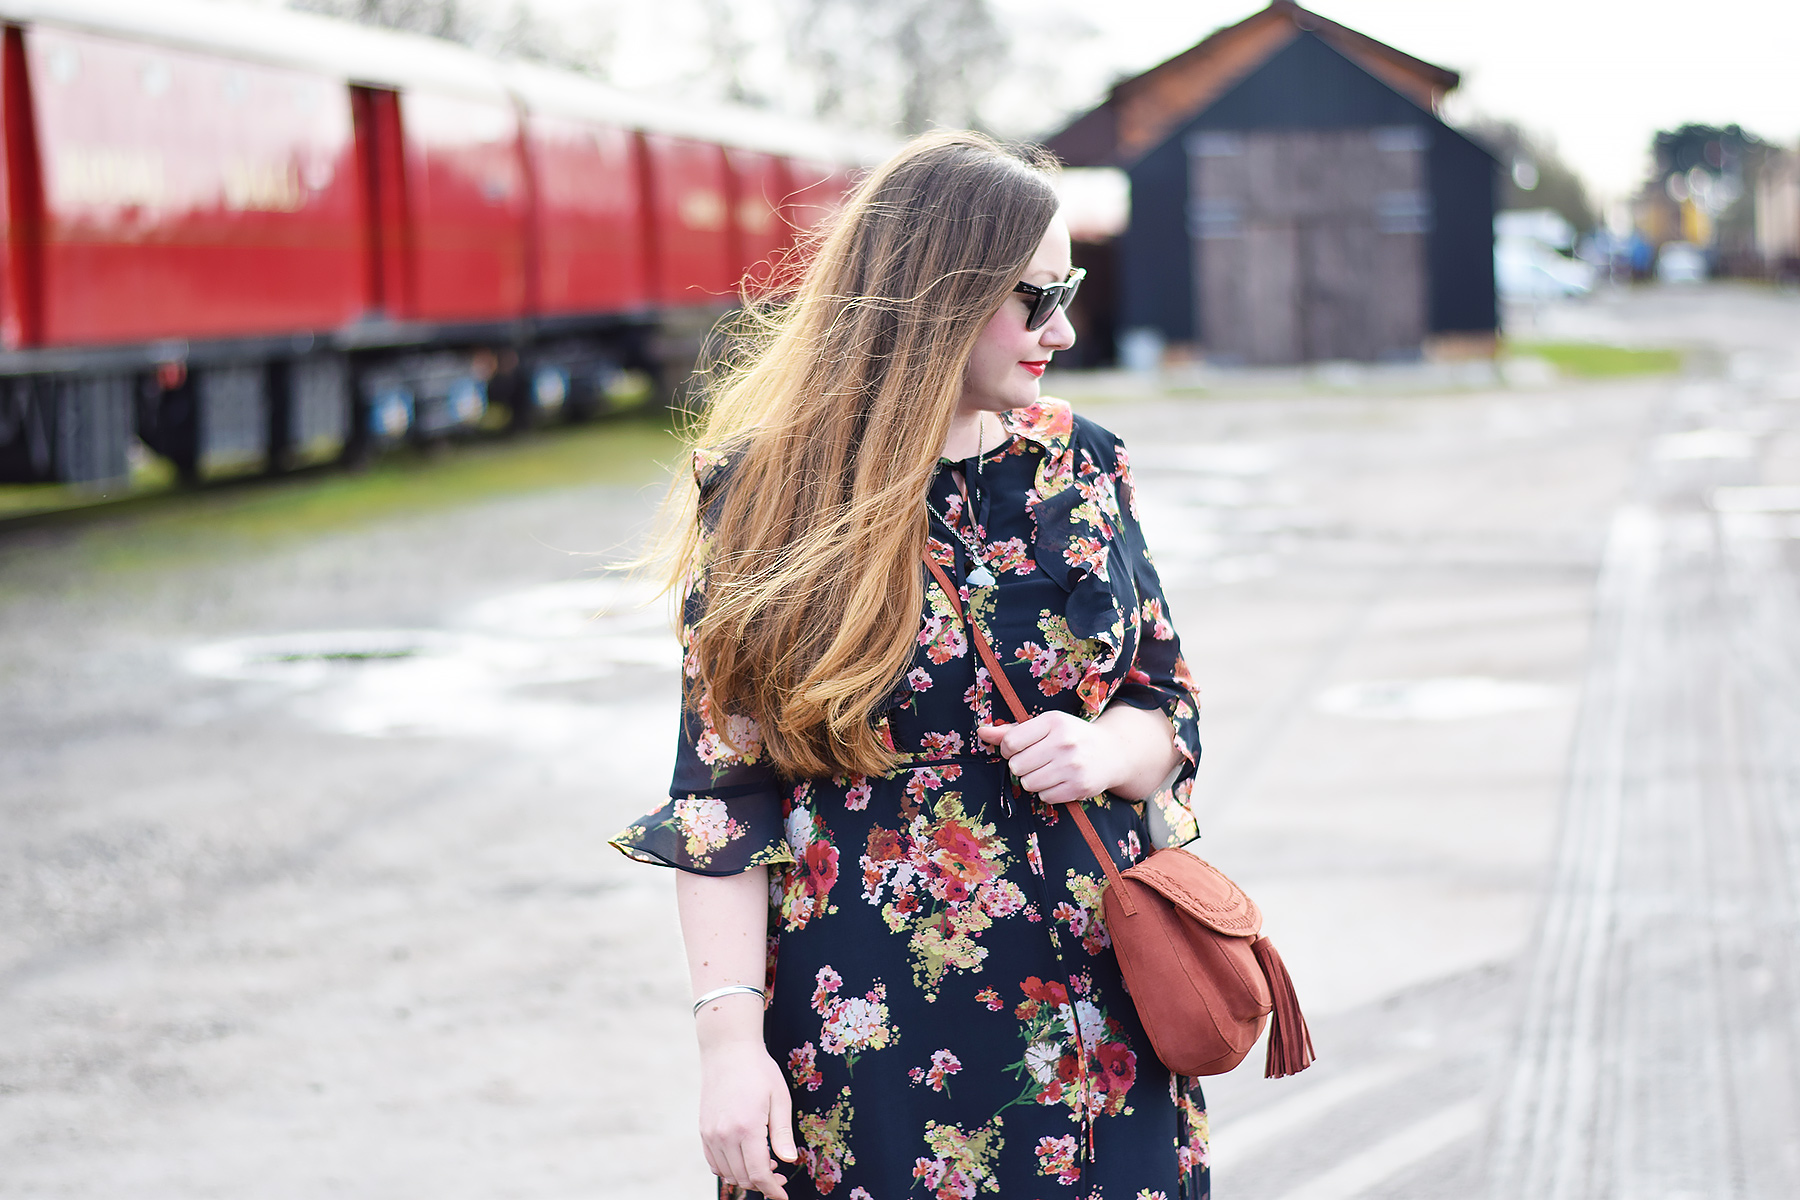 How to wear the floral ruffle style dress